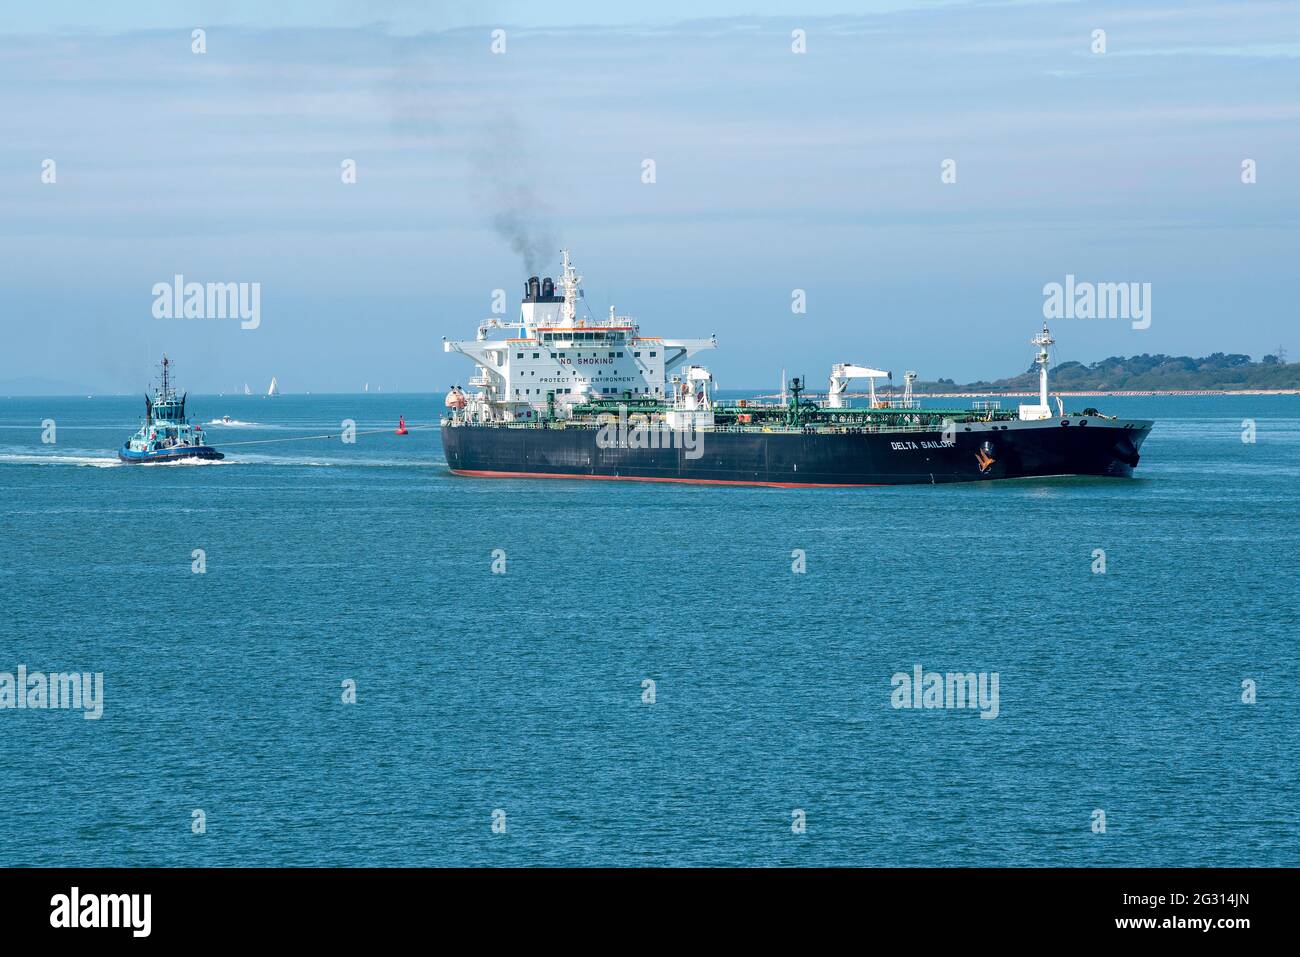 The Solent, Southampton, UK. 2021. Ocean going tug off the stern of a large crude oil tanker as it makes a turn onto Southampton Water, UK Stock Photo